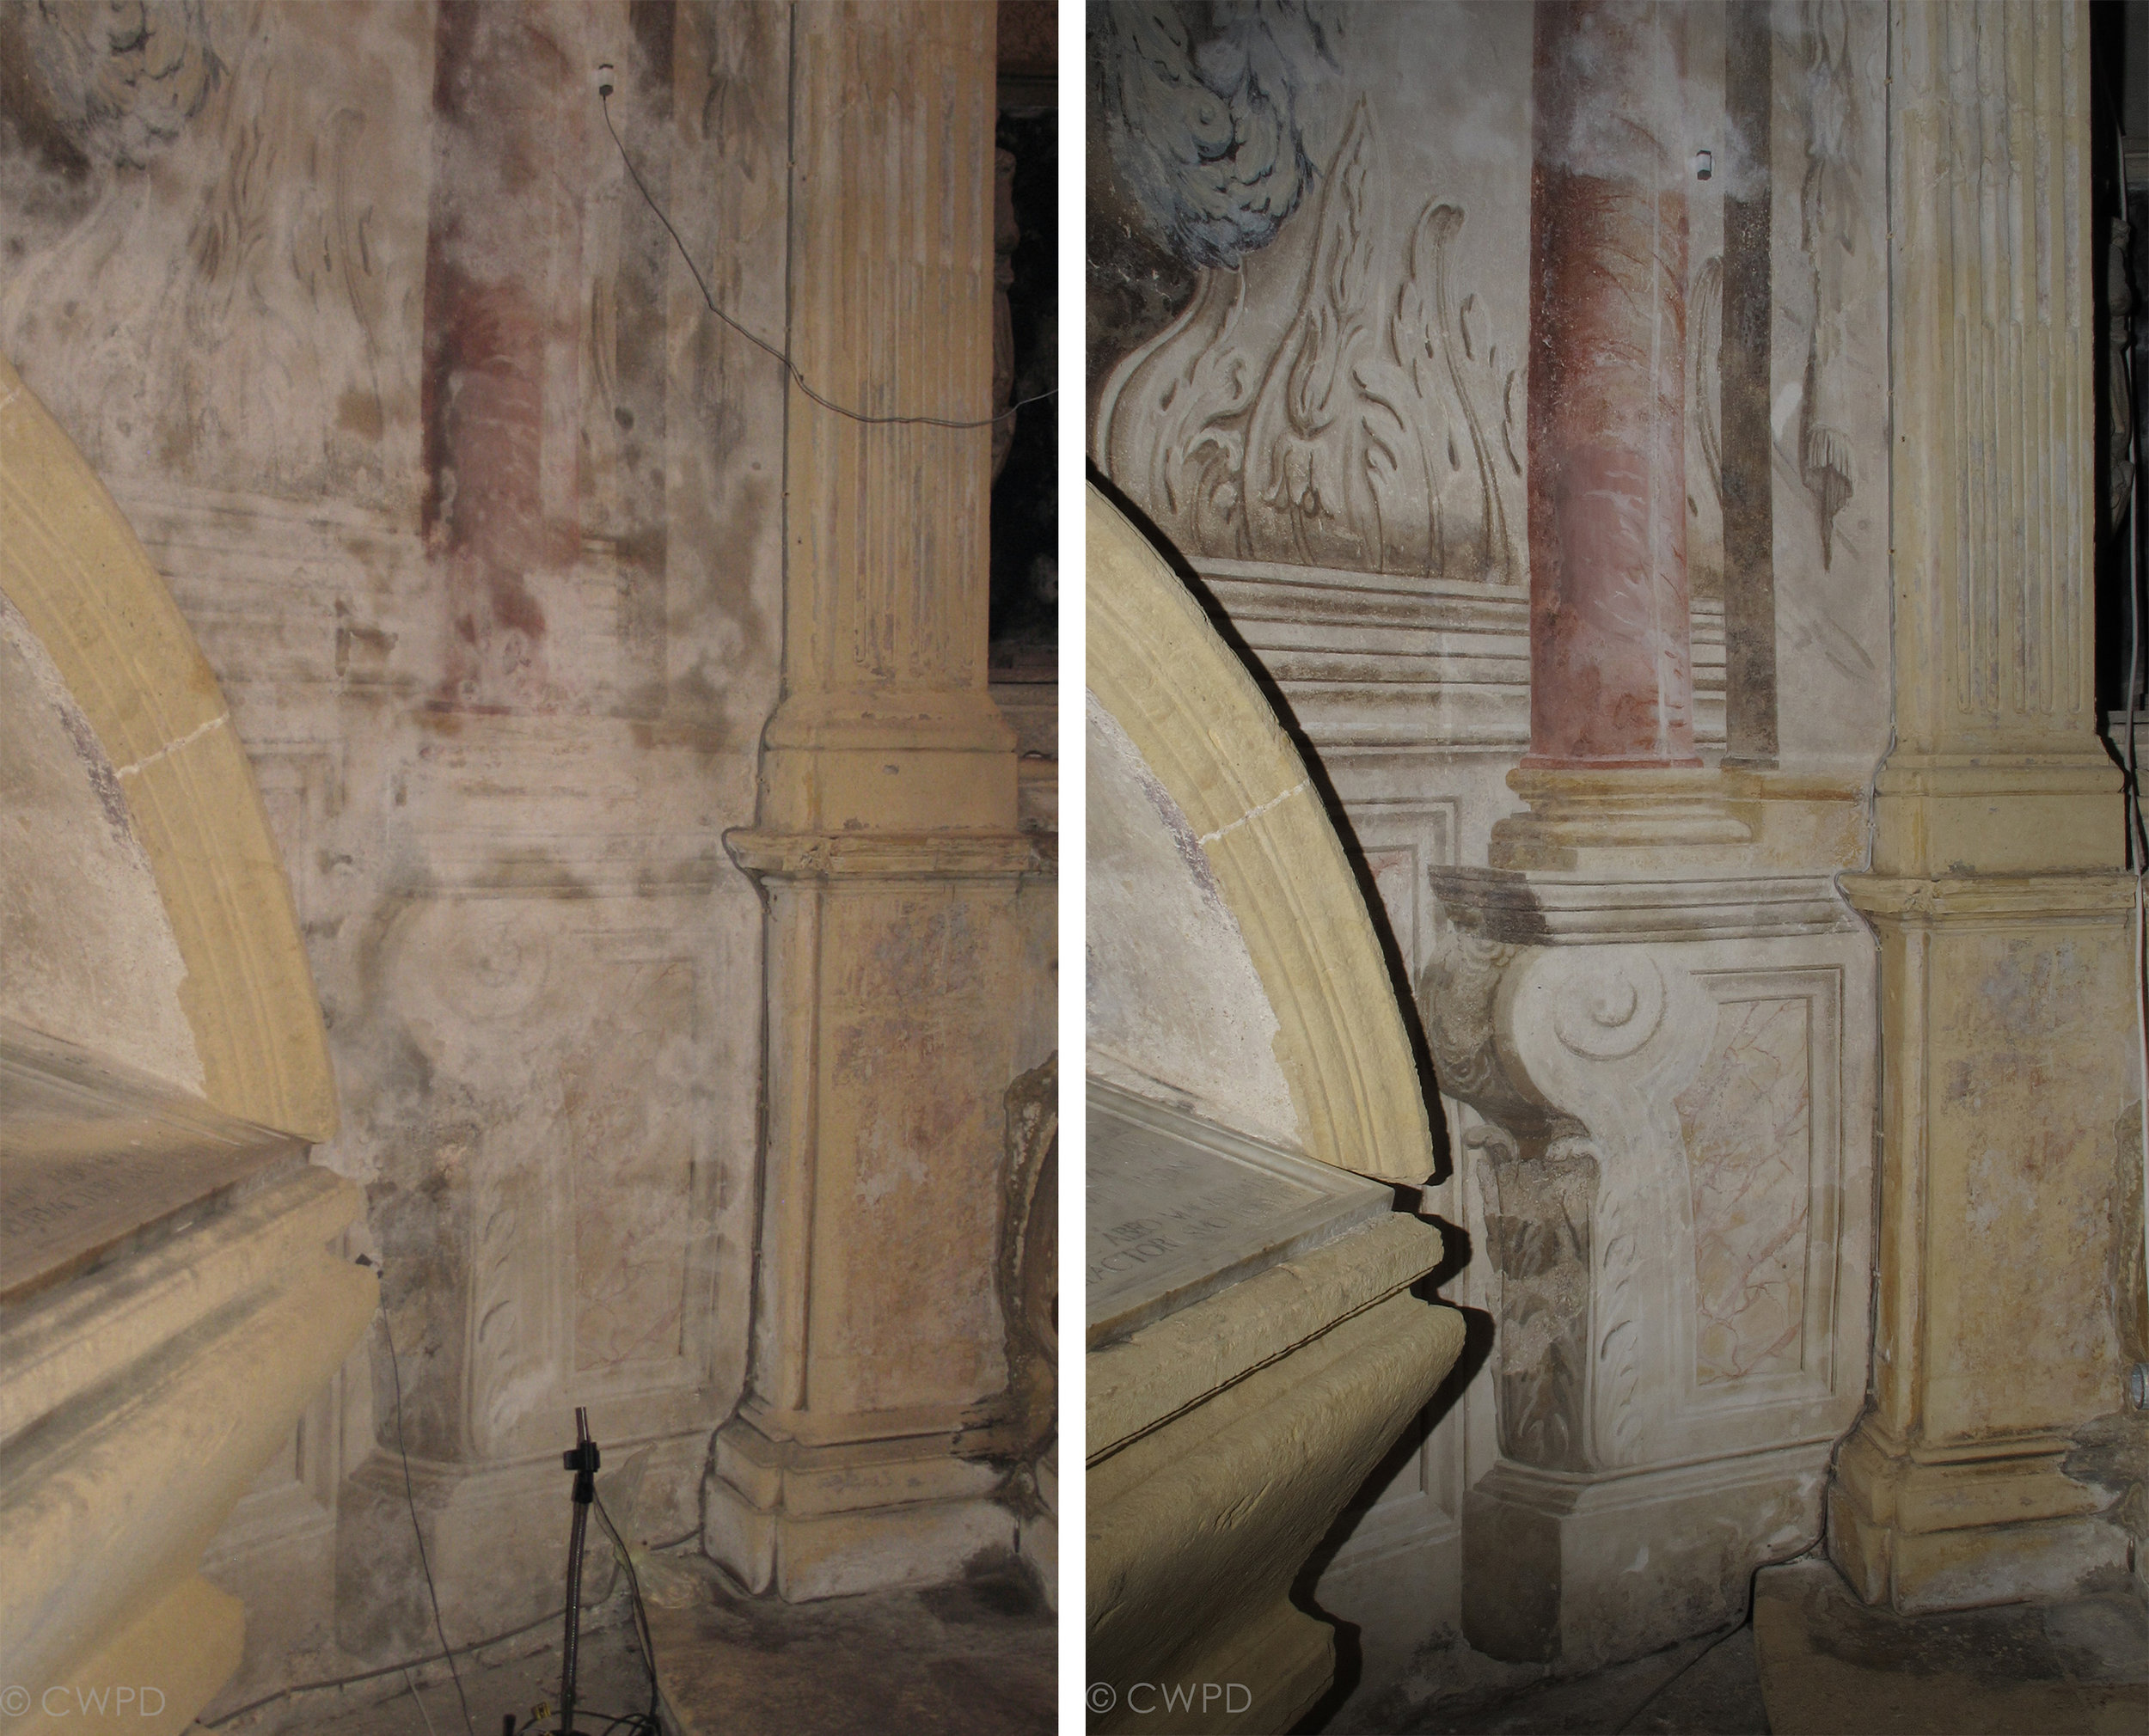  Detail of the wall paintings before (left) and after (right) cleaning.  Image © Courtauld CWPD 